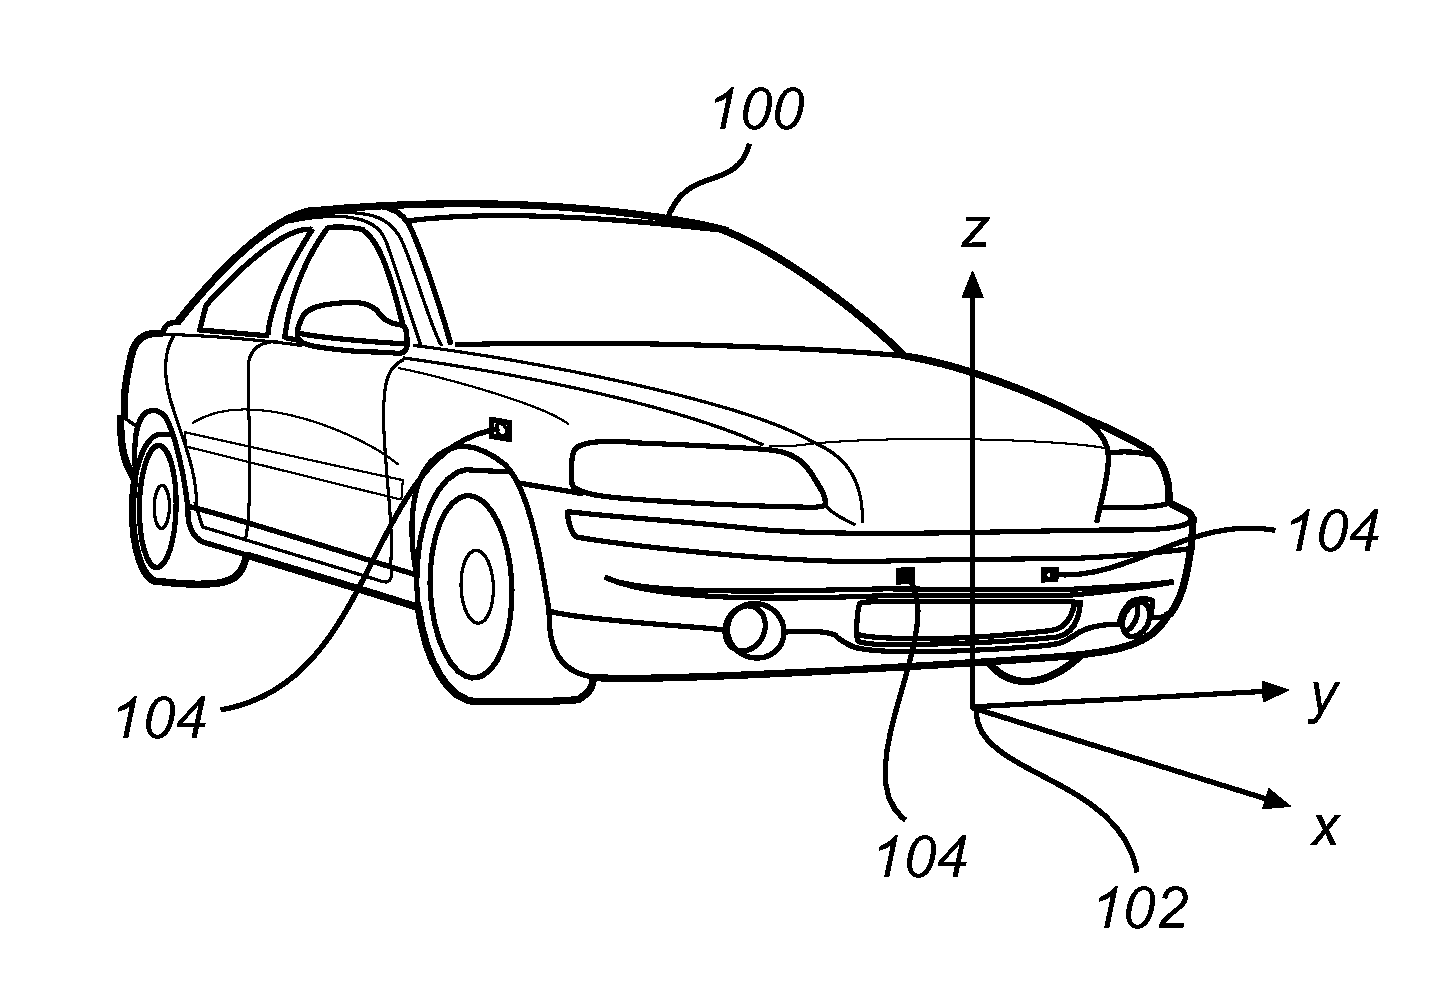 System And Method For Improving A Performance Estimation Of An Operator Of A Vehicle